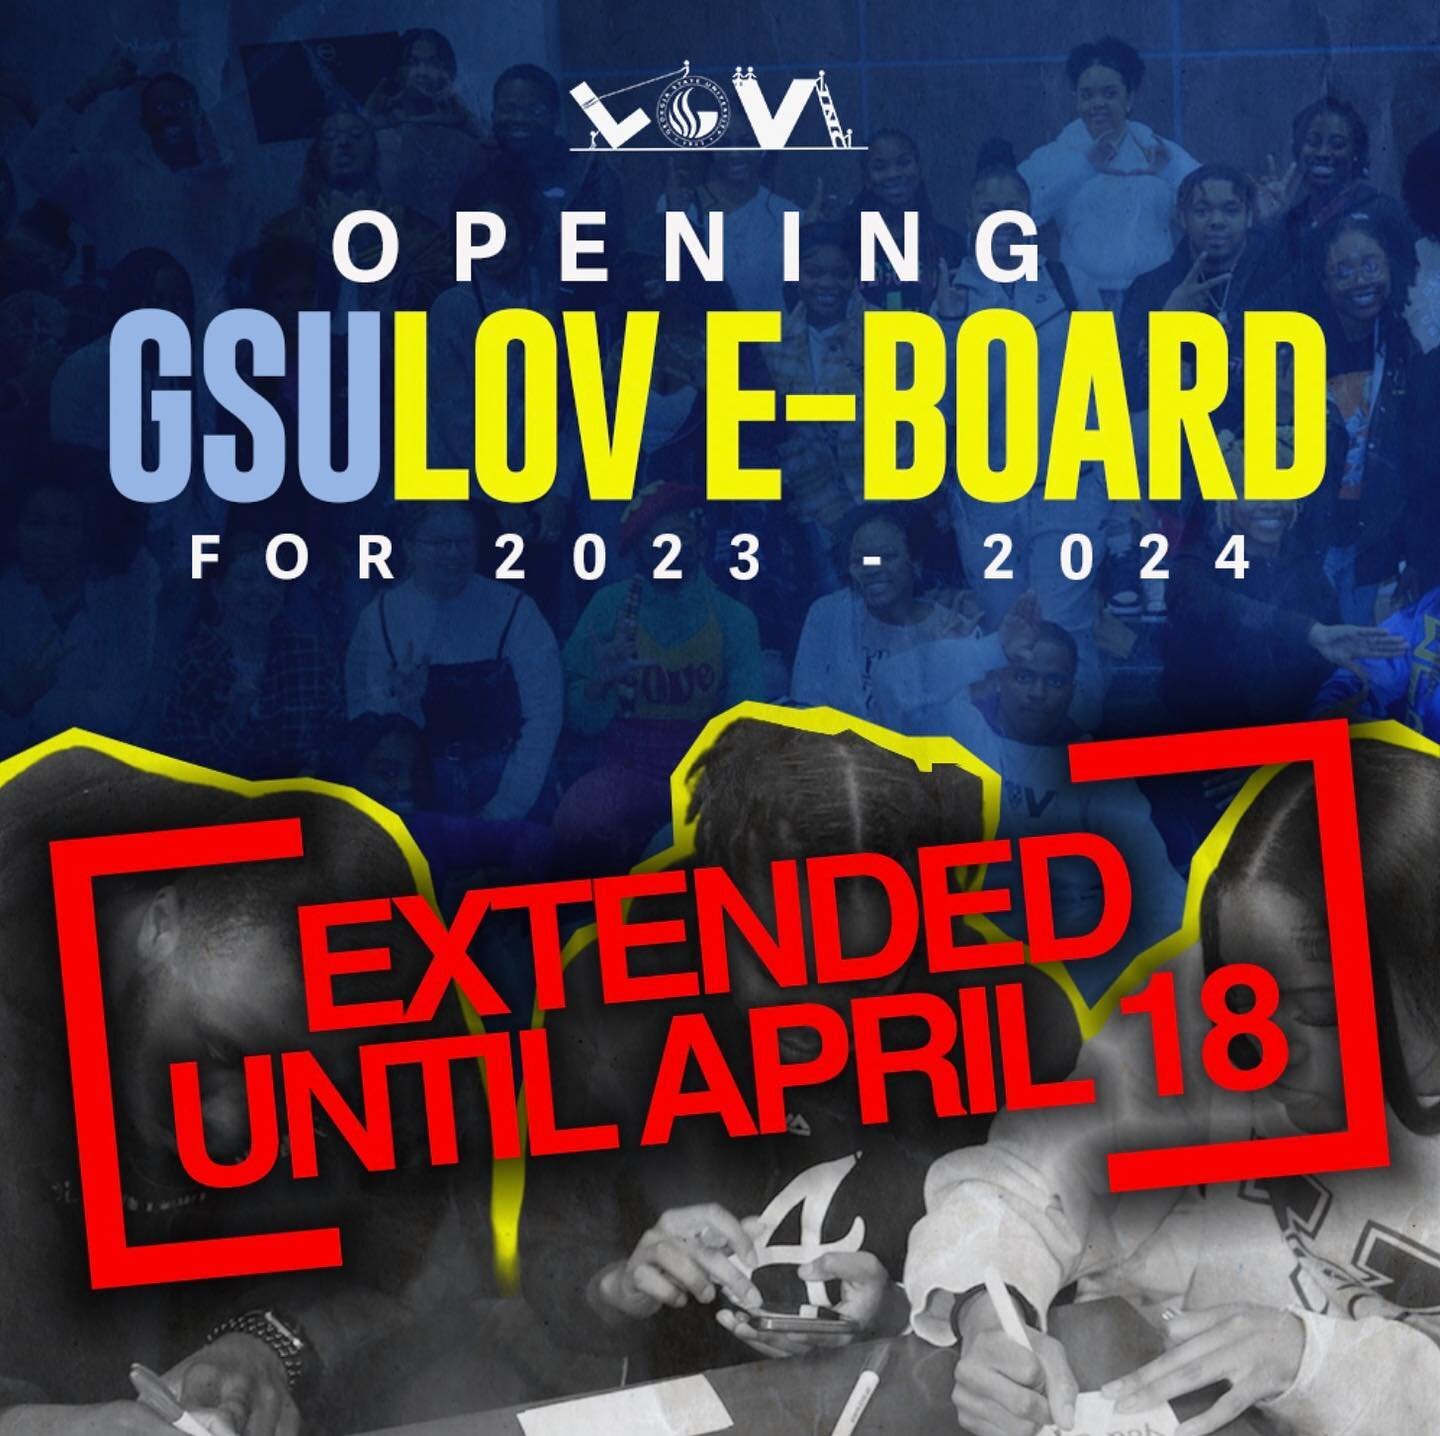 ⚠️GSU E-BOARD APPS EXTENDED⚠️ 

Interested in community service and leadership experience? 🥳 Come join the executive board of LOV at GSU! 

Click the link in our bio to apply and read more about what each open position has to offer!